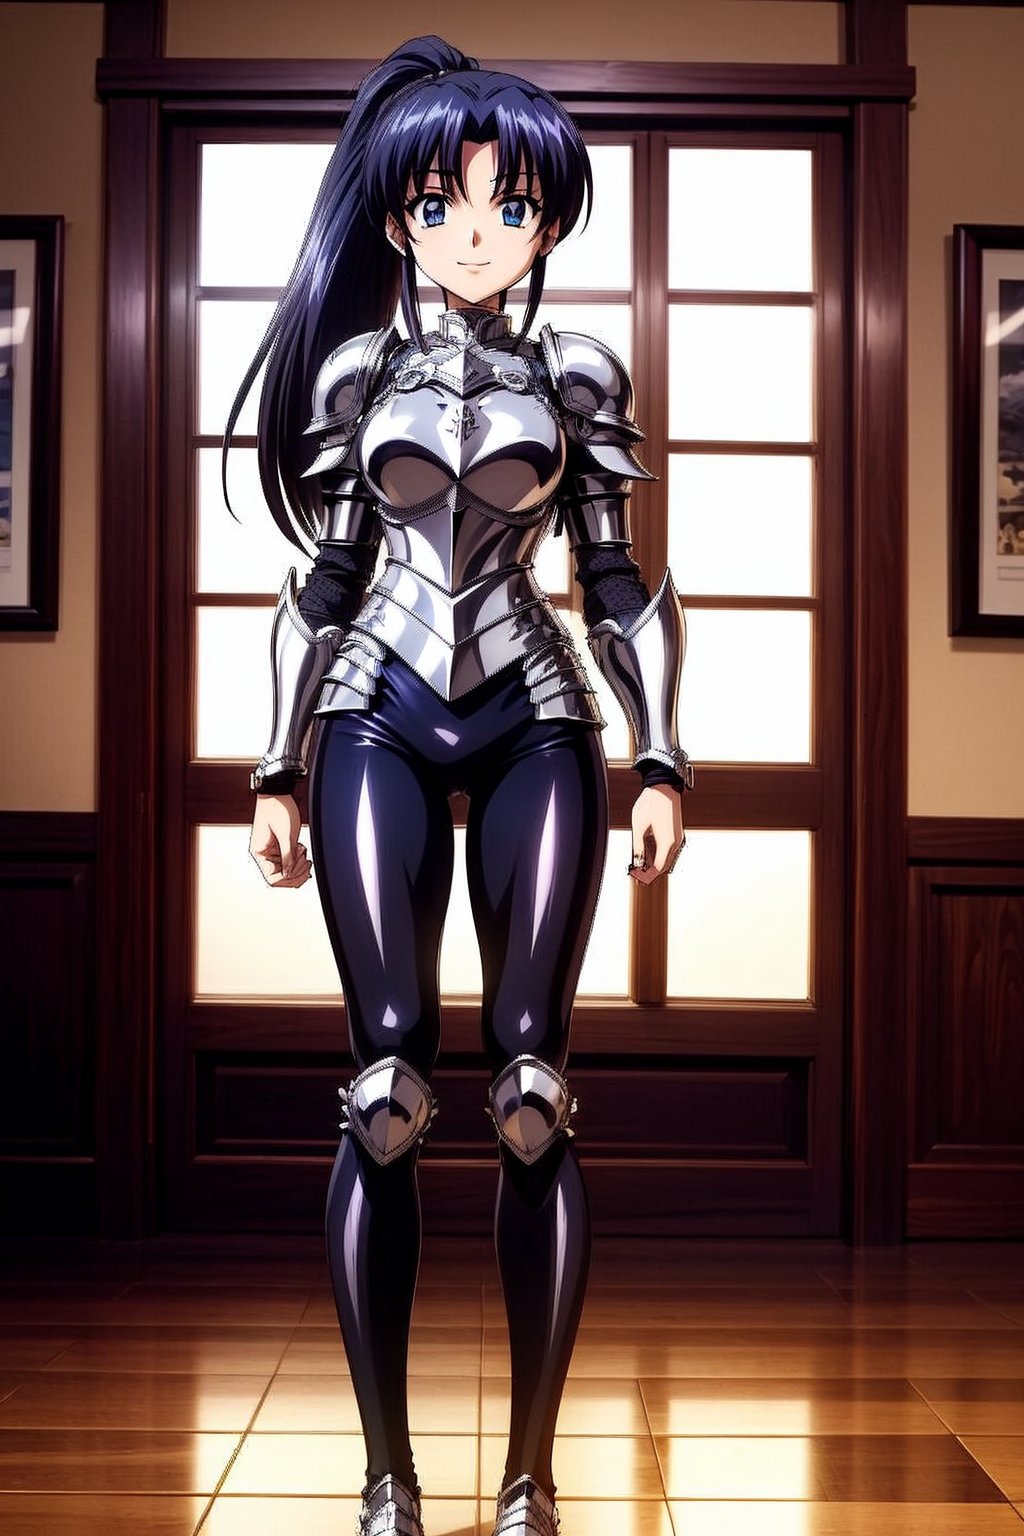 Kaimya kaoru 1996, 1girl, solo, slender girl, beautiful 20 year old anime girl with: athletic body, long legs, (proportioned female body,(The head should be about 1/8 of the total body height)), medium bust, blue eyes, black long hair tied in ponytail; wearing a knight armor, armor black pants; smiling shyly, blade in the hand; stop in half the castle. in knight pose; in high quality, ,Armor